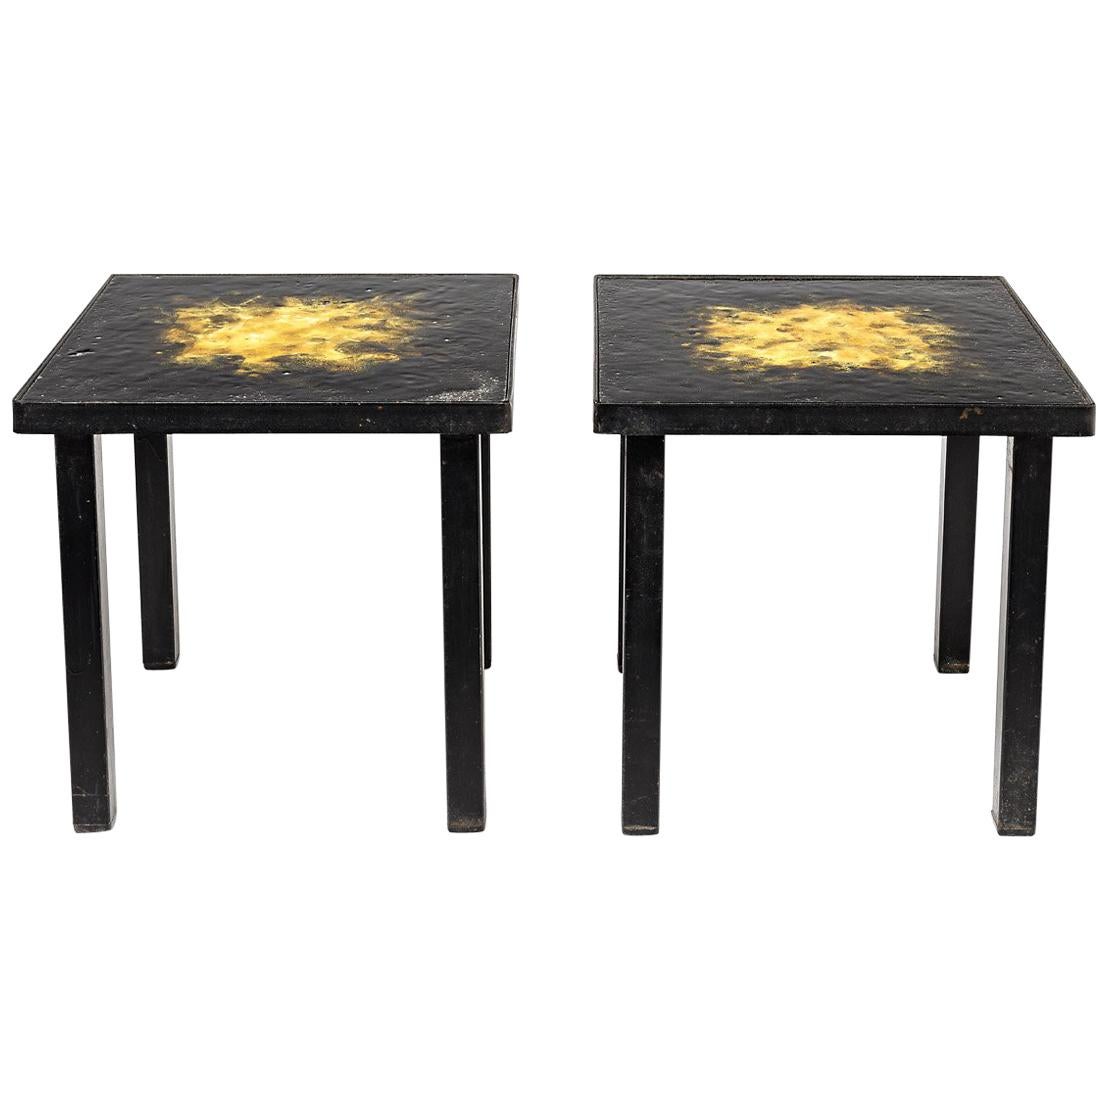 Pair of Ceramic Low Coffee Tables Shinny Black and Yellow, circa 1970